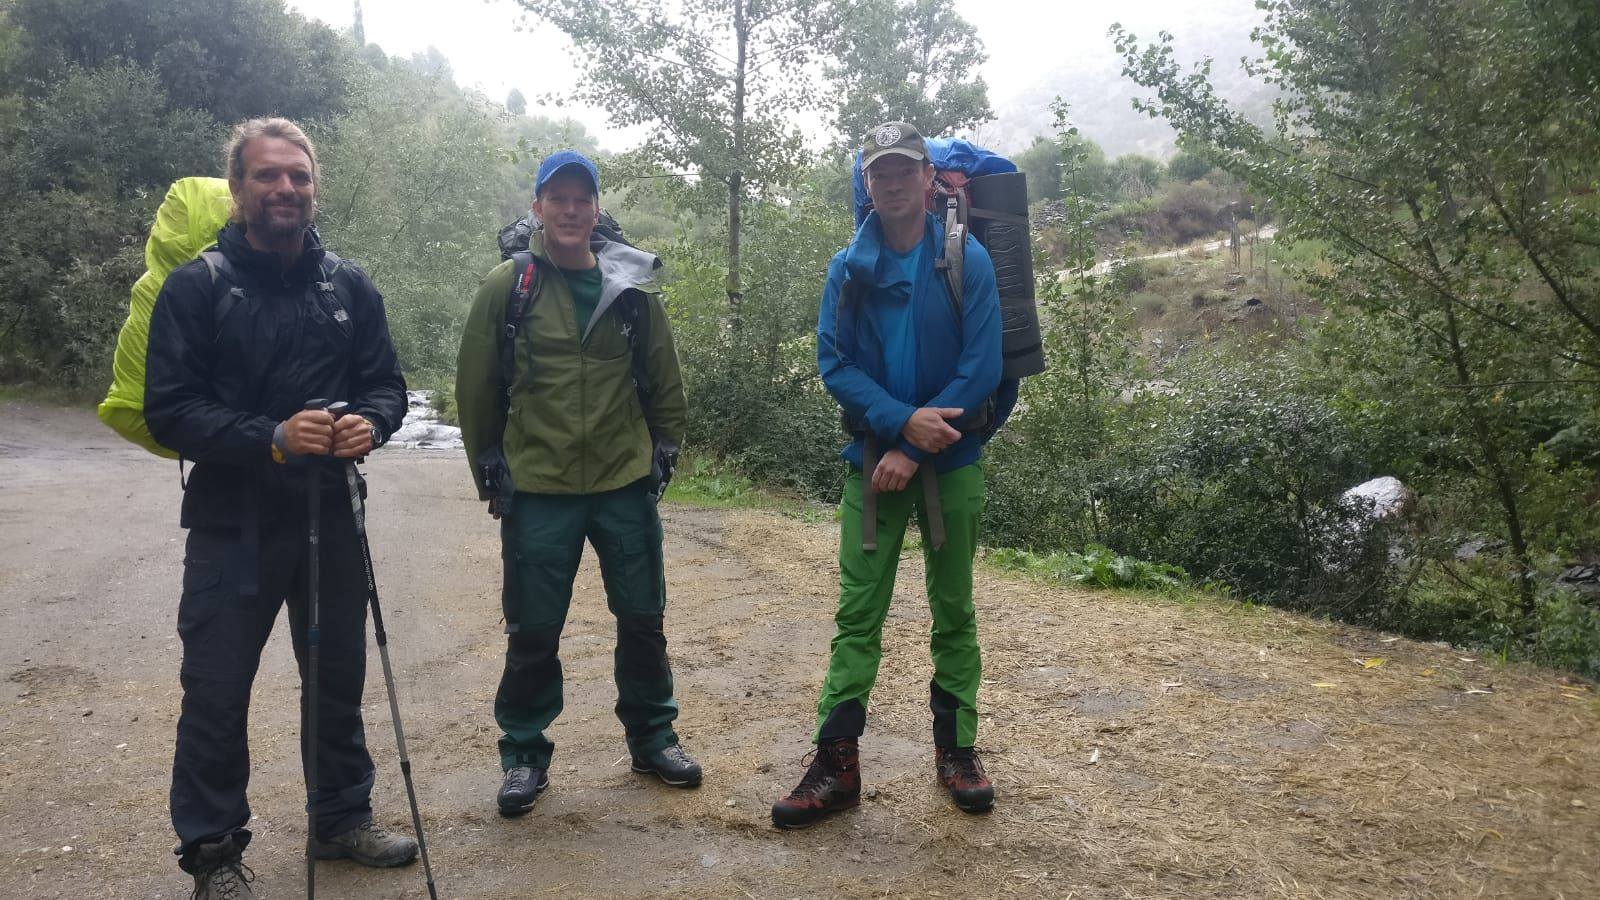 Los Tres Miles with returning guests Geir Harald & Geir Lennart 17th - 21st October 2018